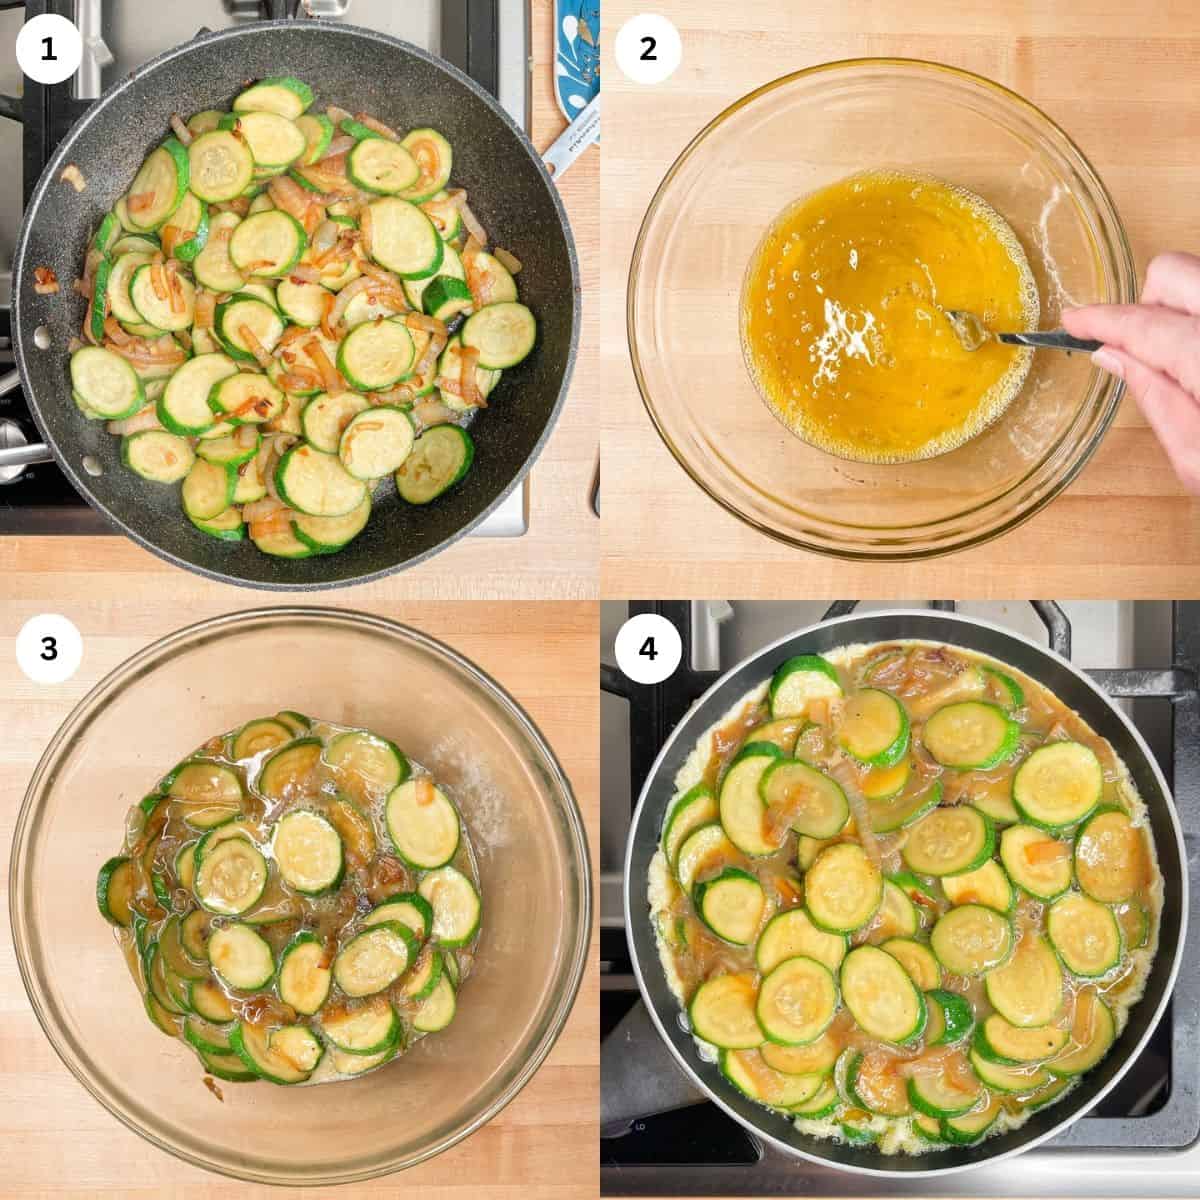 the first 4 steps in making the recipe. Fry the onions and zucchini, mix the eggs, mix it together then fry the first side. 